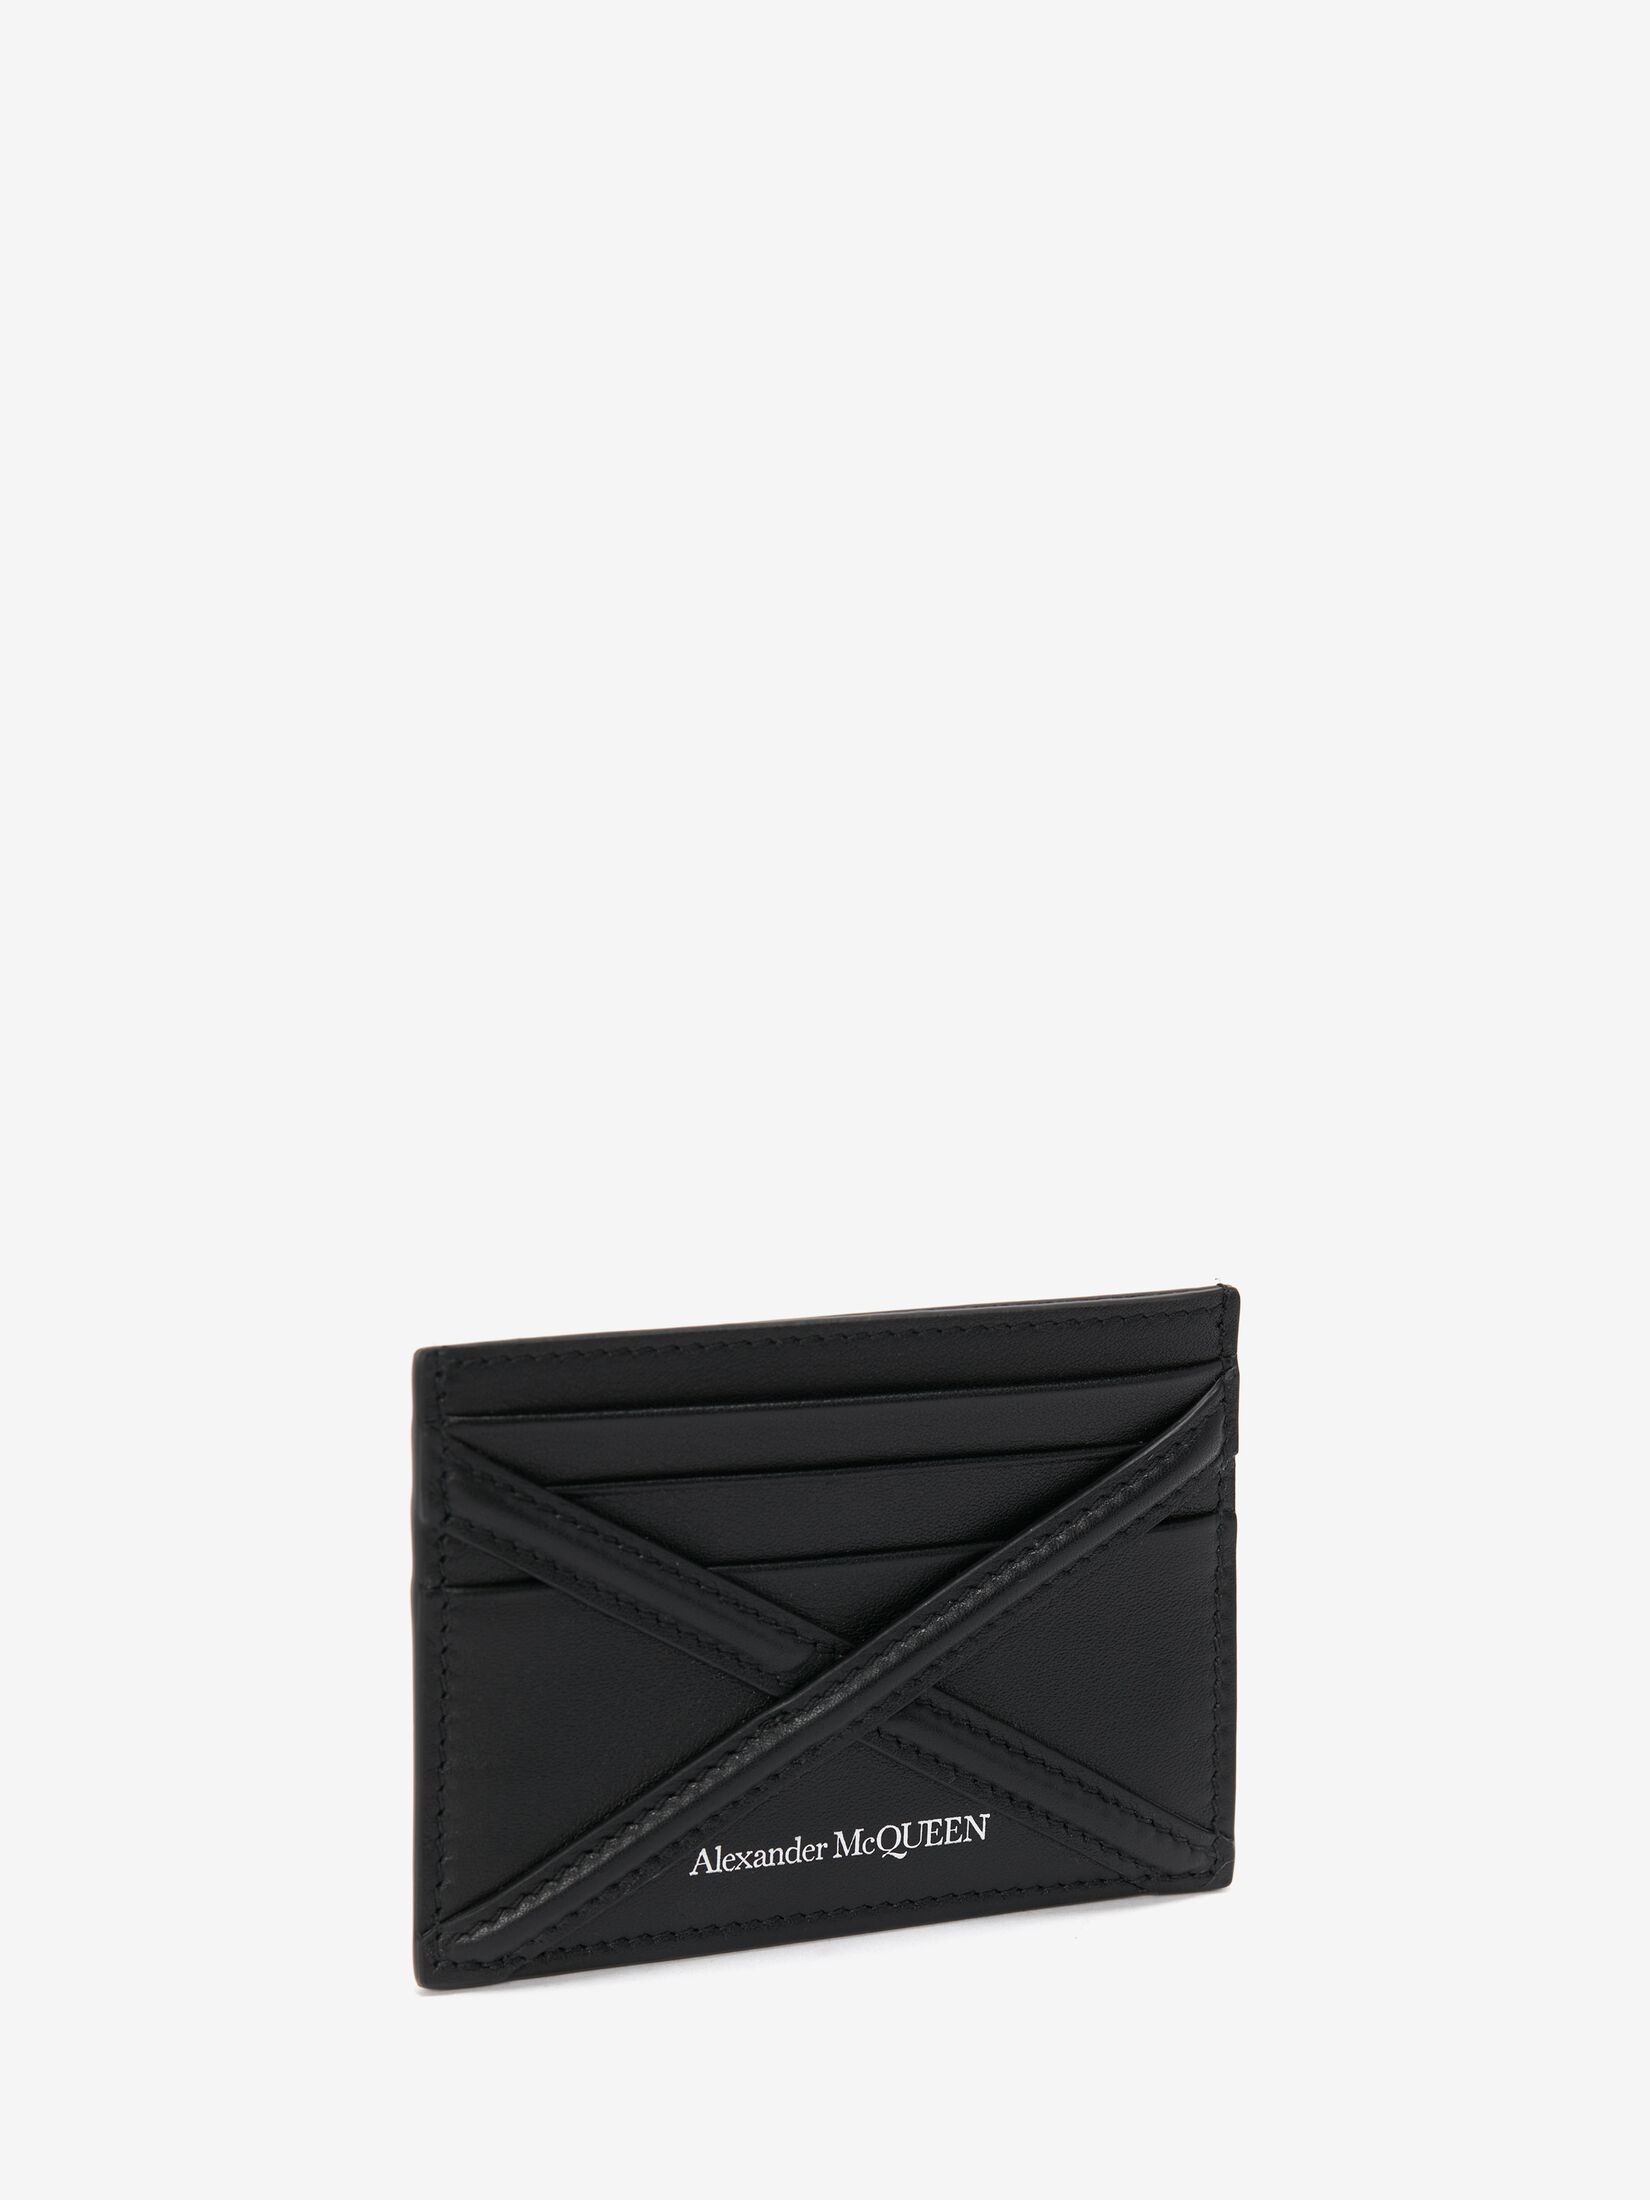 The Harness card holder